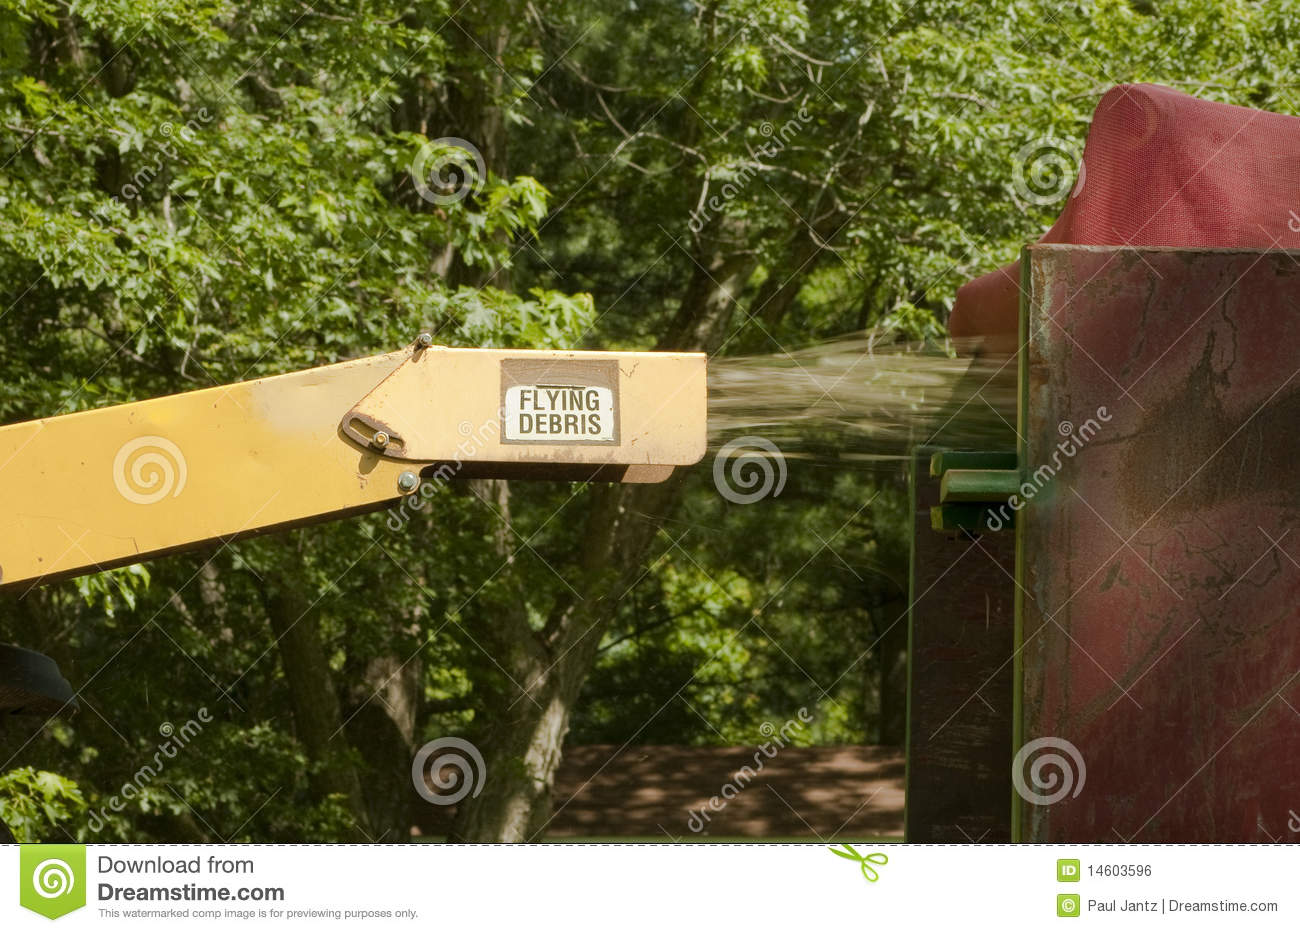 Industrial Wood Chipper In Action Royalty Free Stock Image   Image